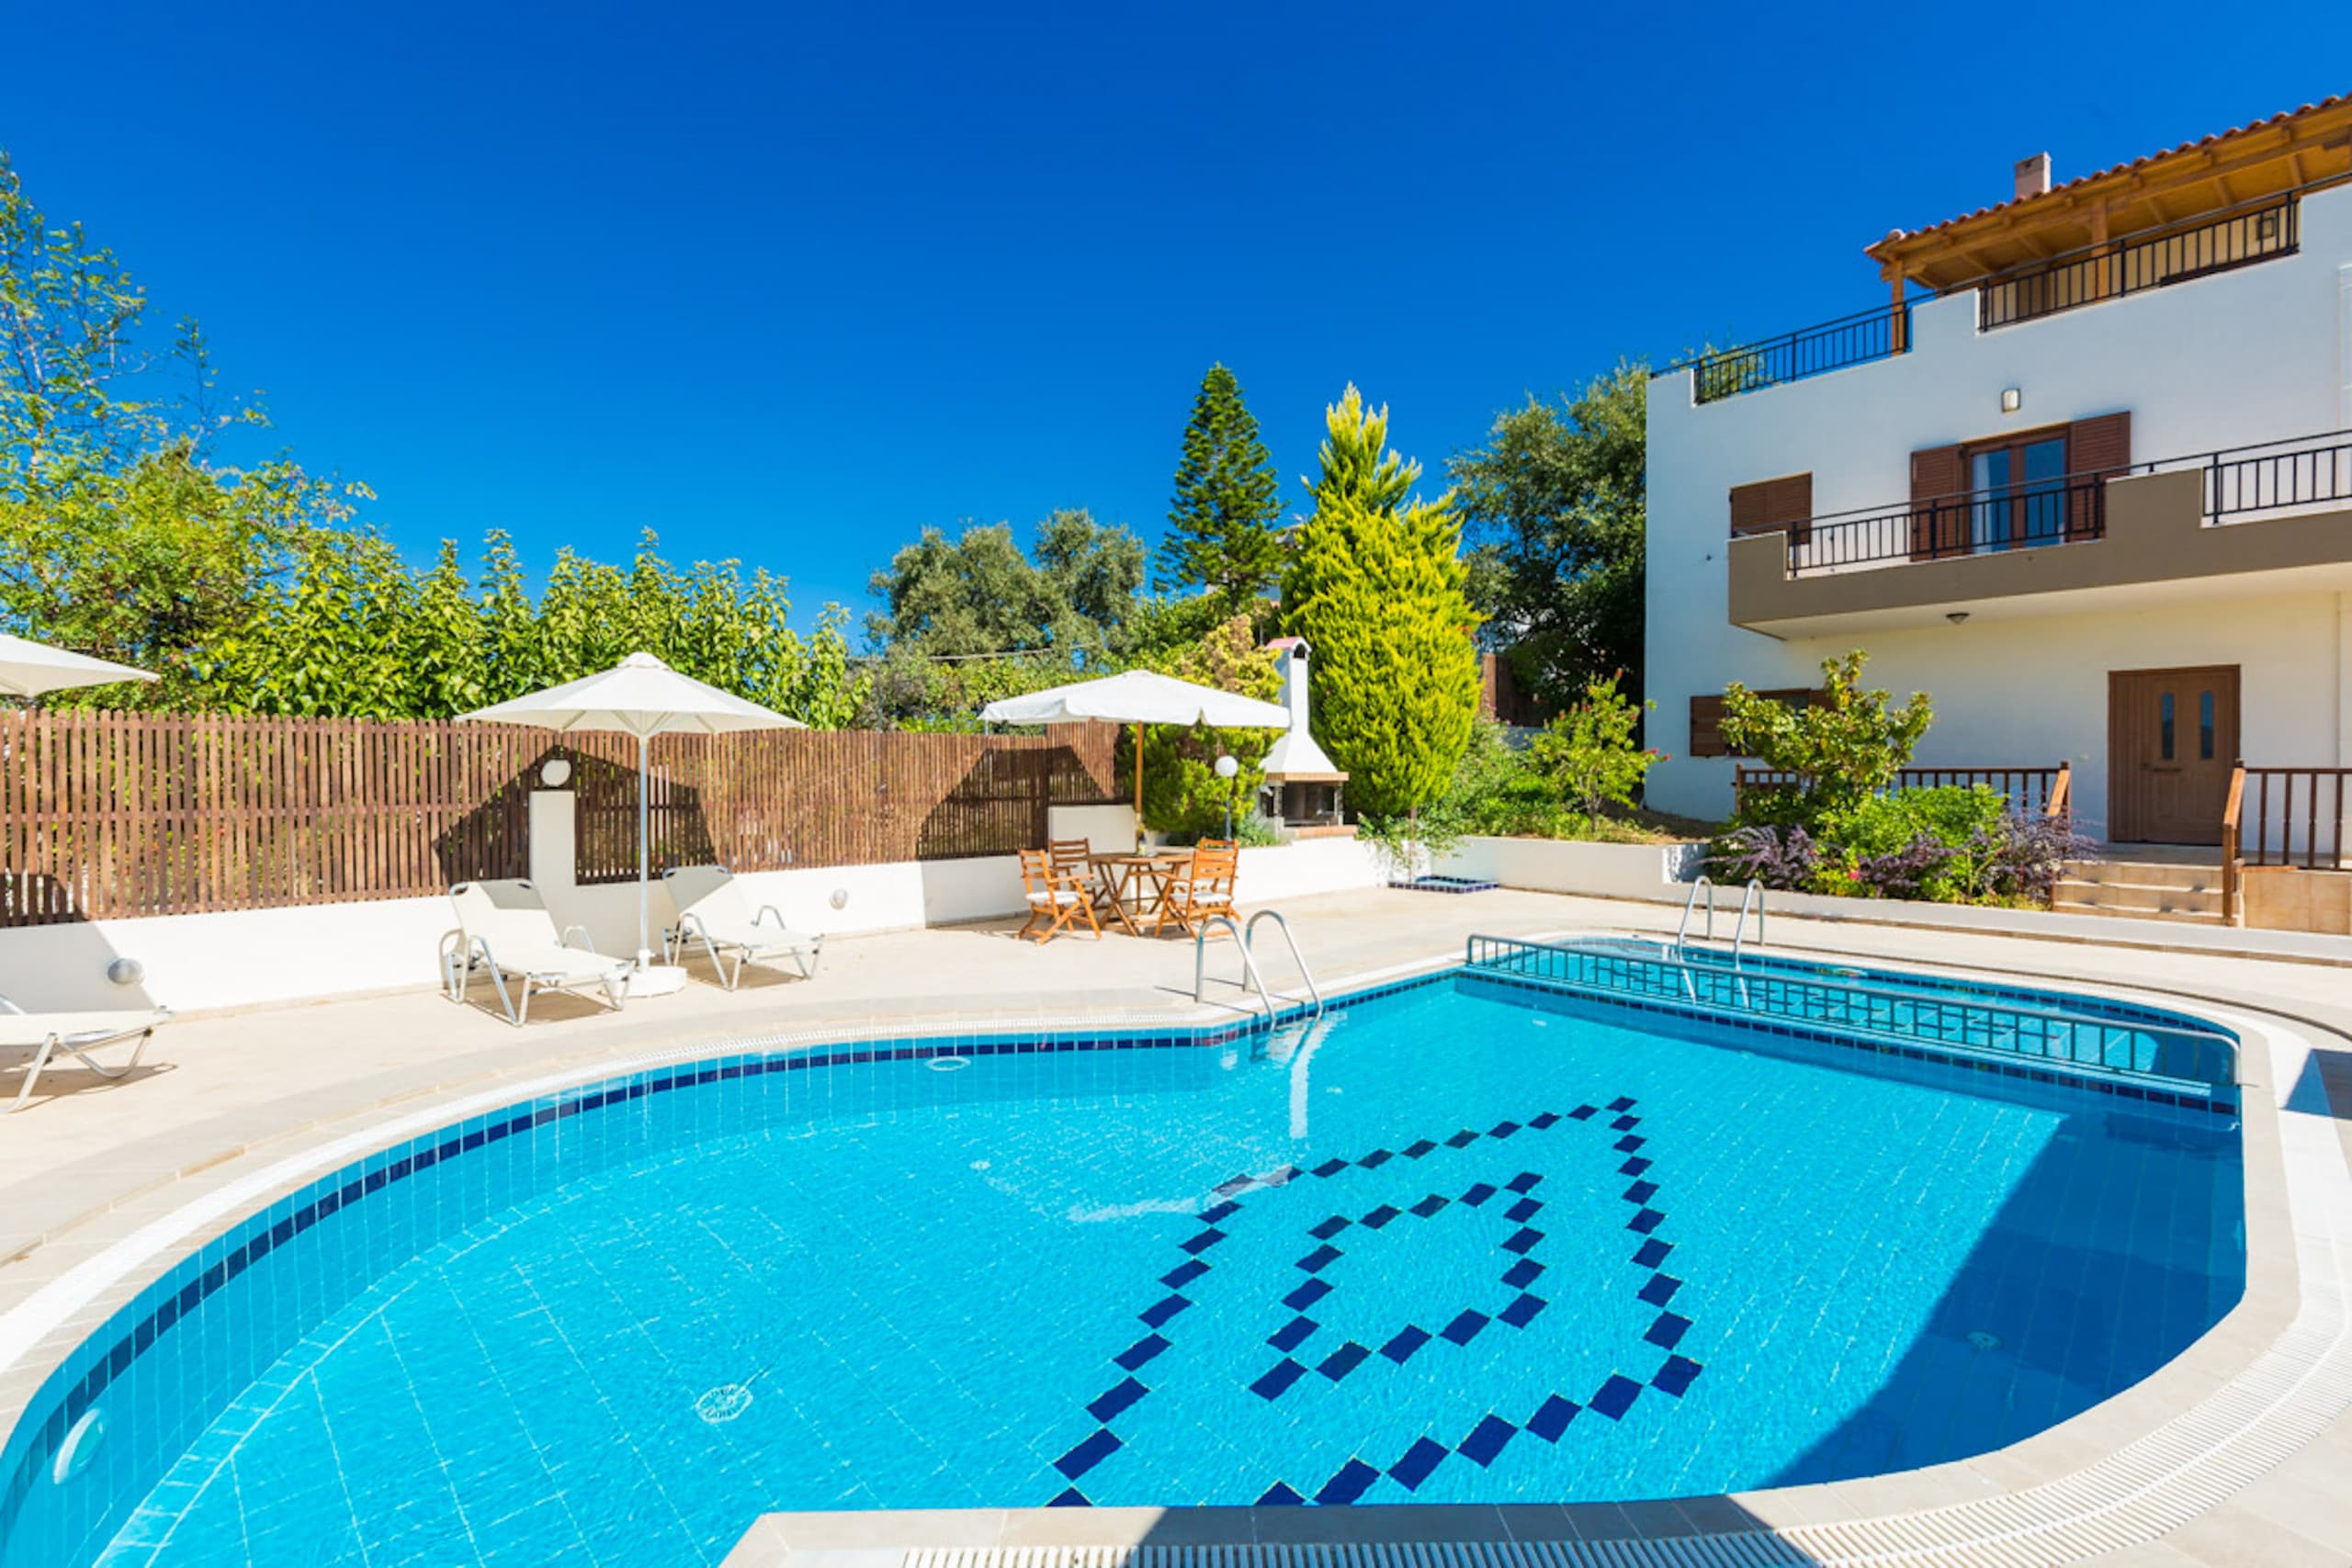 Anemomylos Villa I features a private pool with a children's compartment!